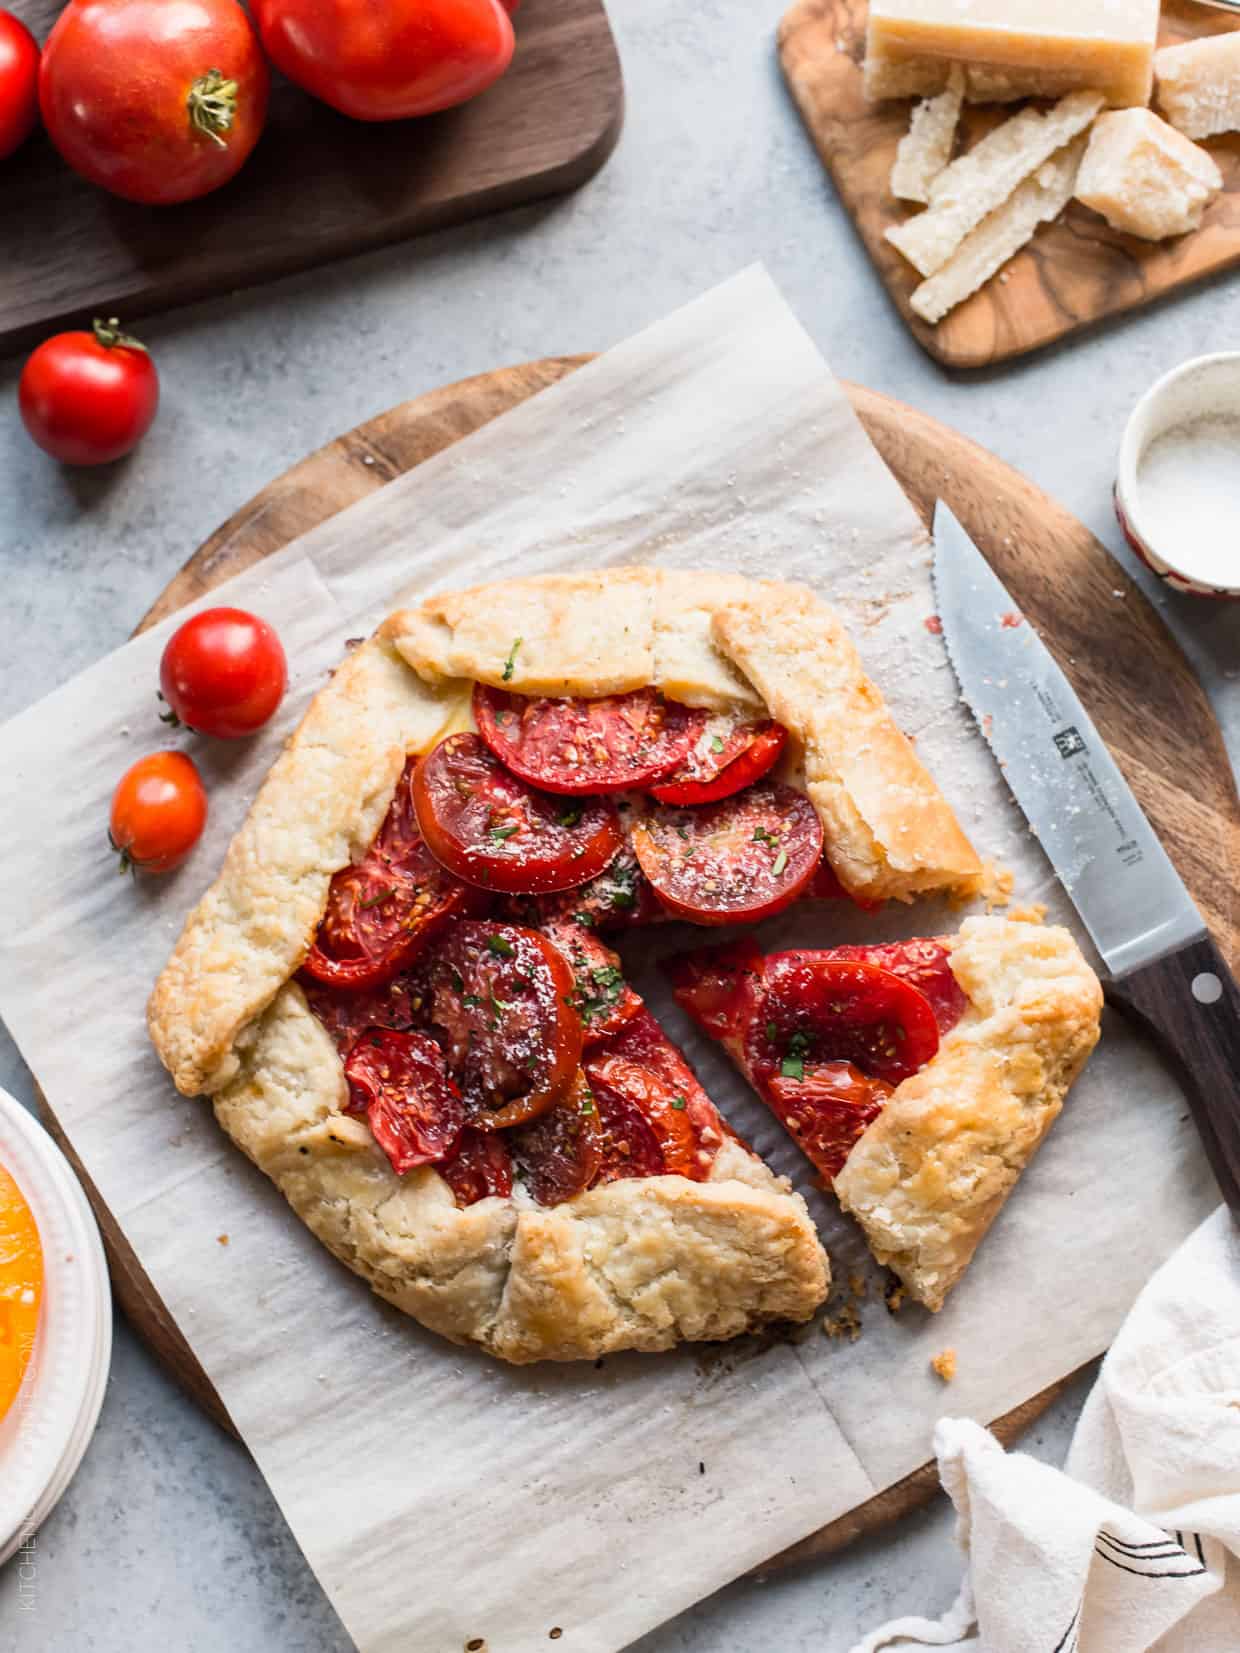 Cutting a slice from a Tomato Ricotta Galette.